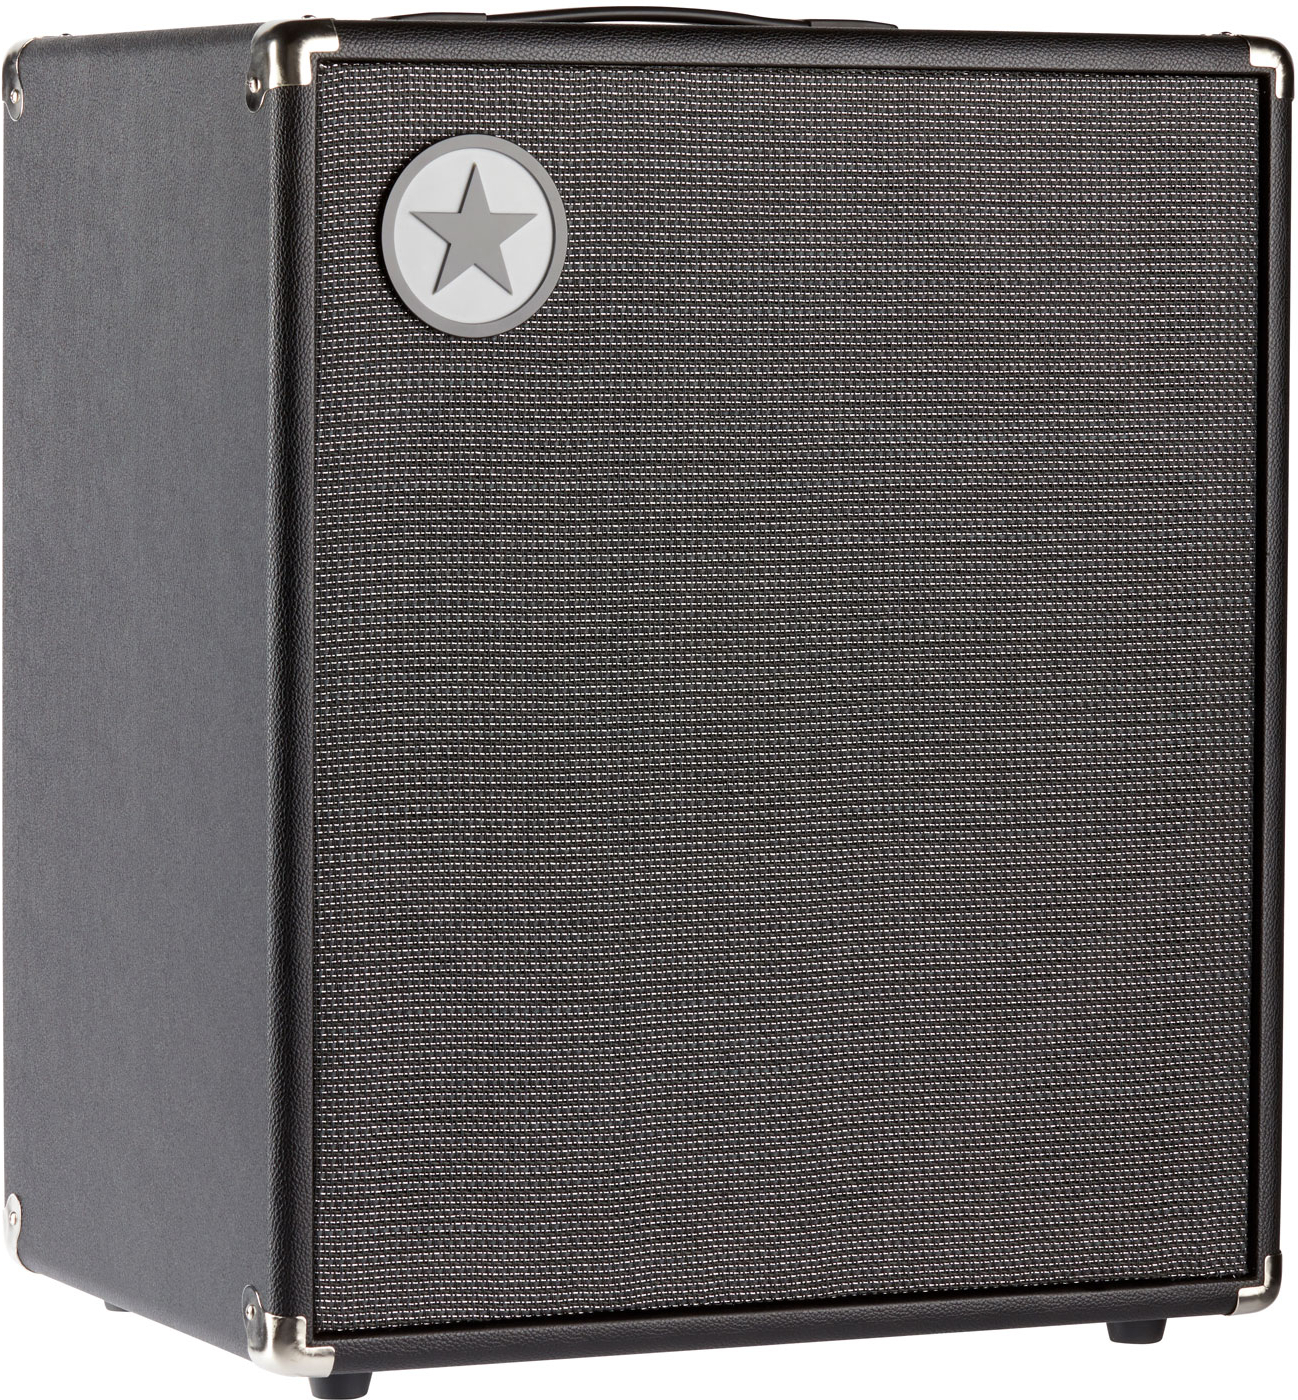 Blackstar Unity 250act - Electric guitar amp cabinet - Main picture